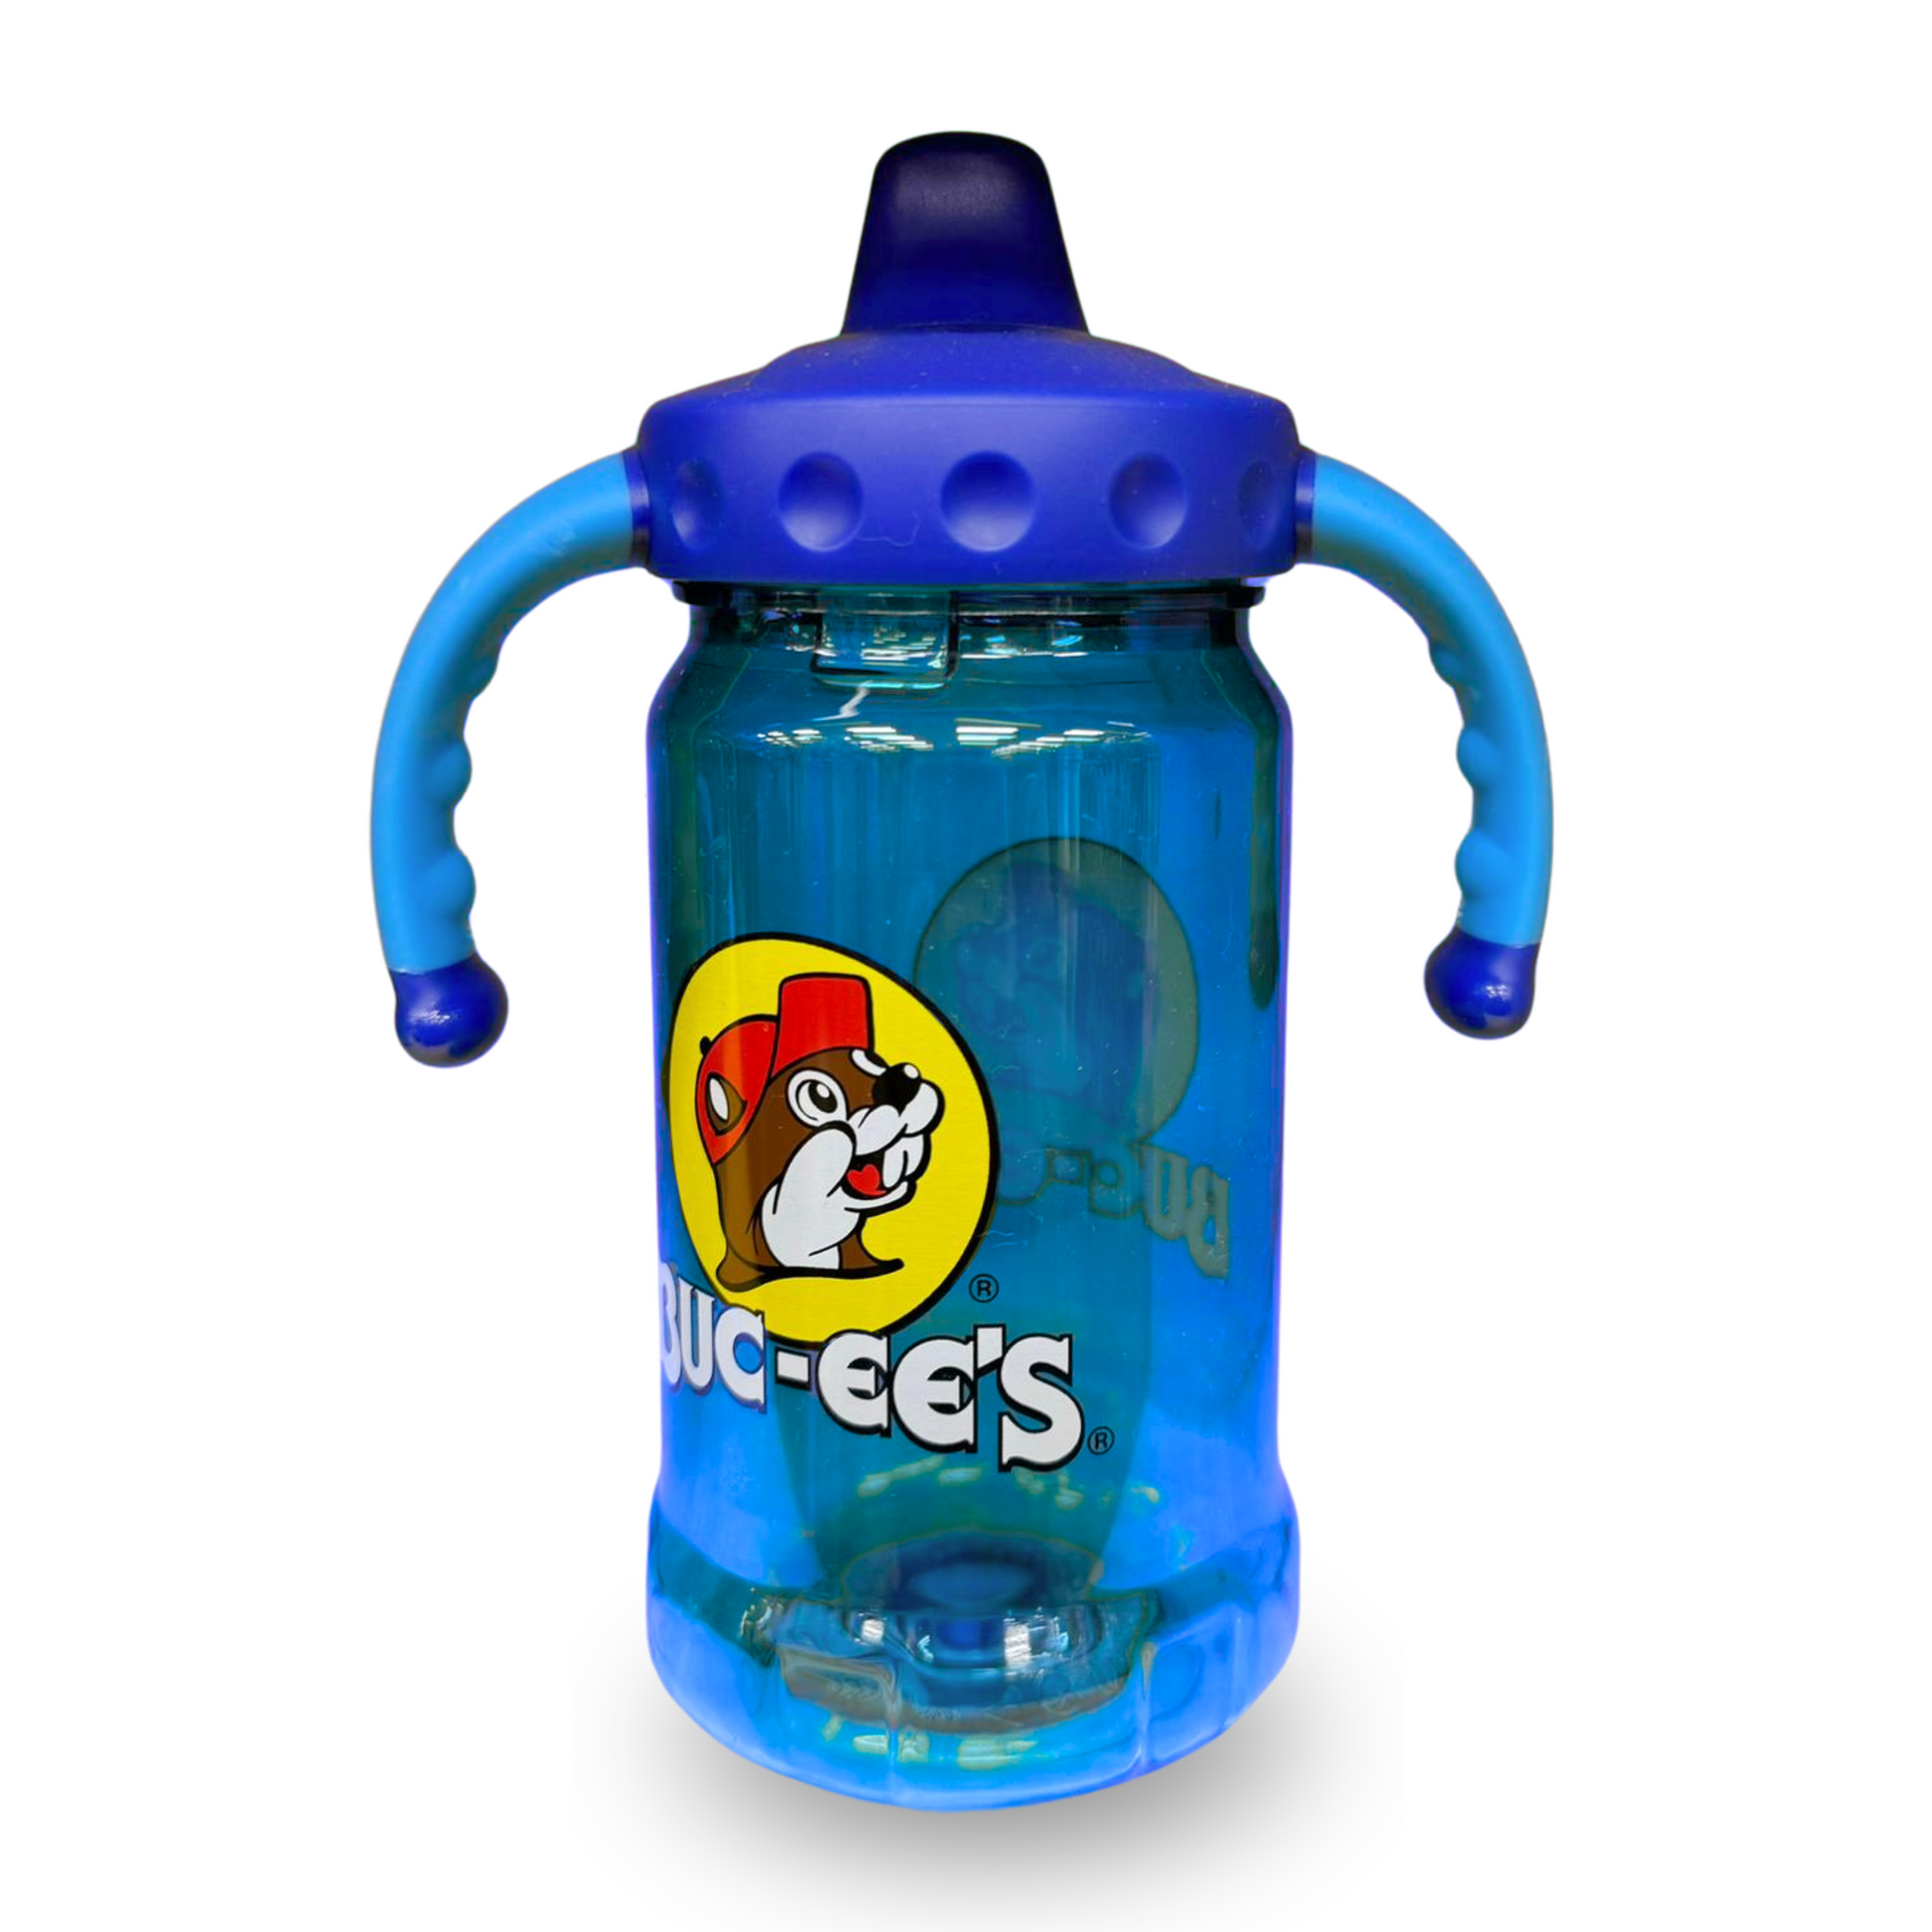 Buc-ee's Spill Proof Sippy Cup with Handles 12oz buc ees buc ee's bucees buccees buc-ees